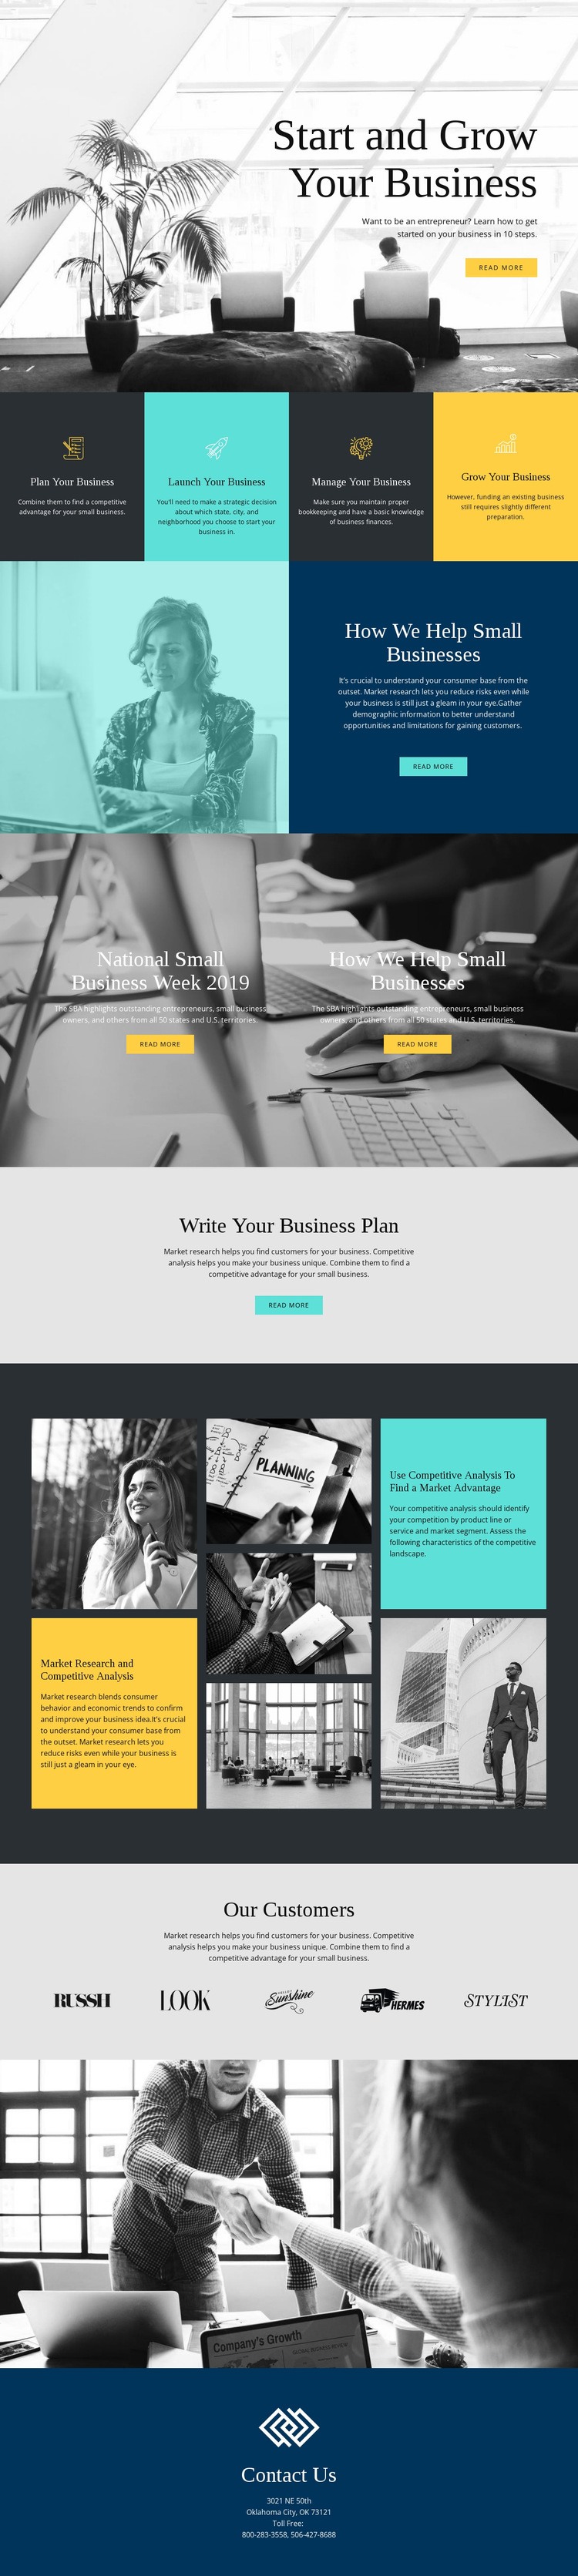 Start and grow your business Landing Page